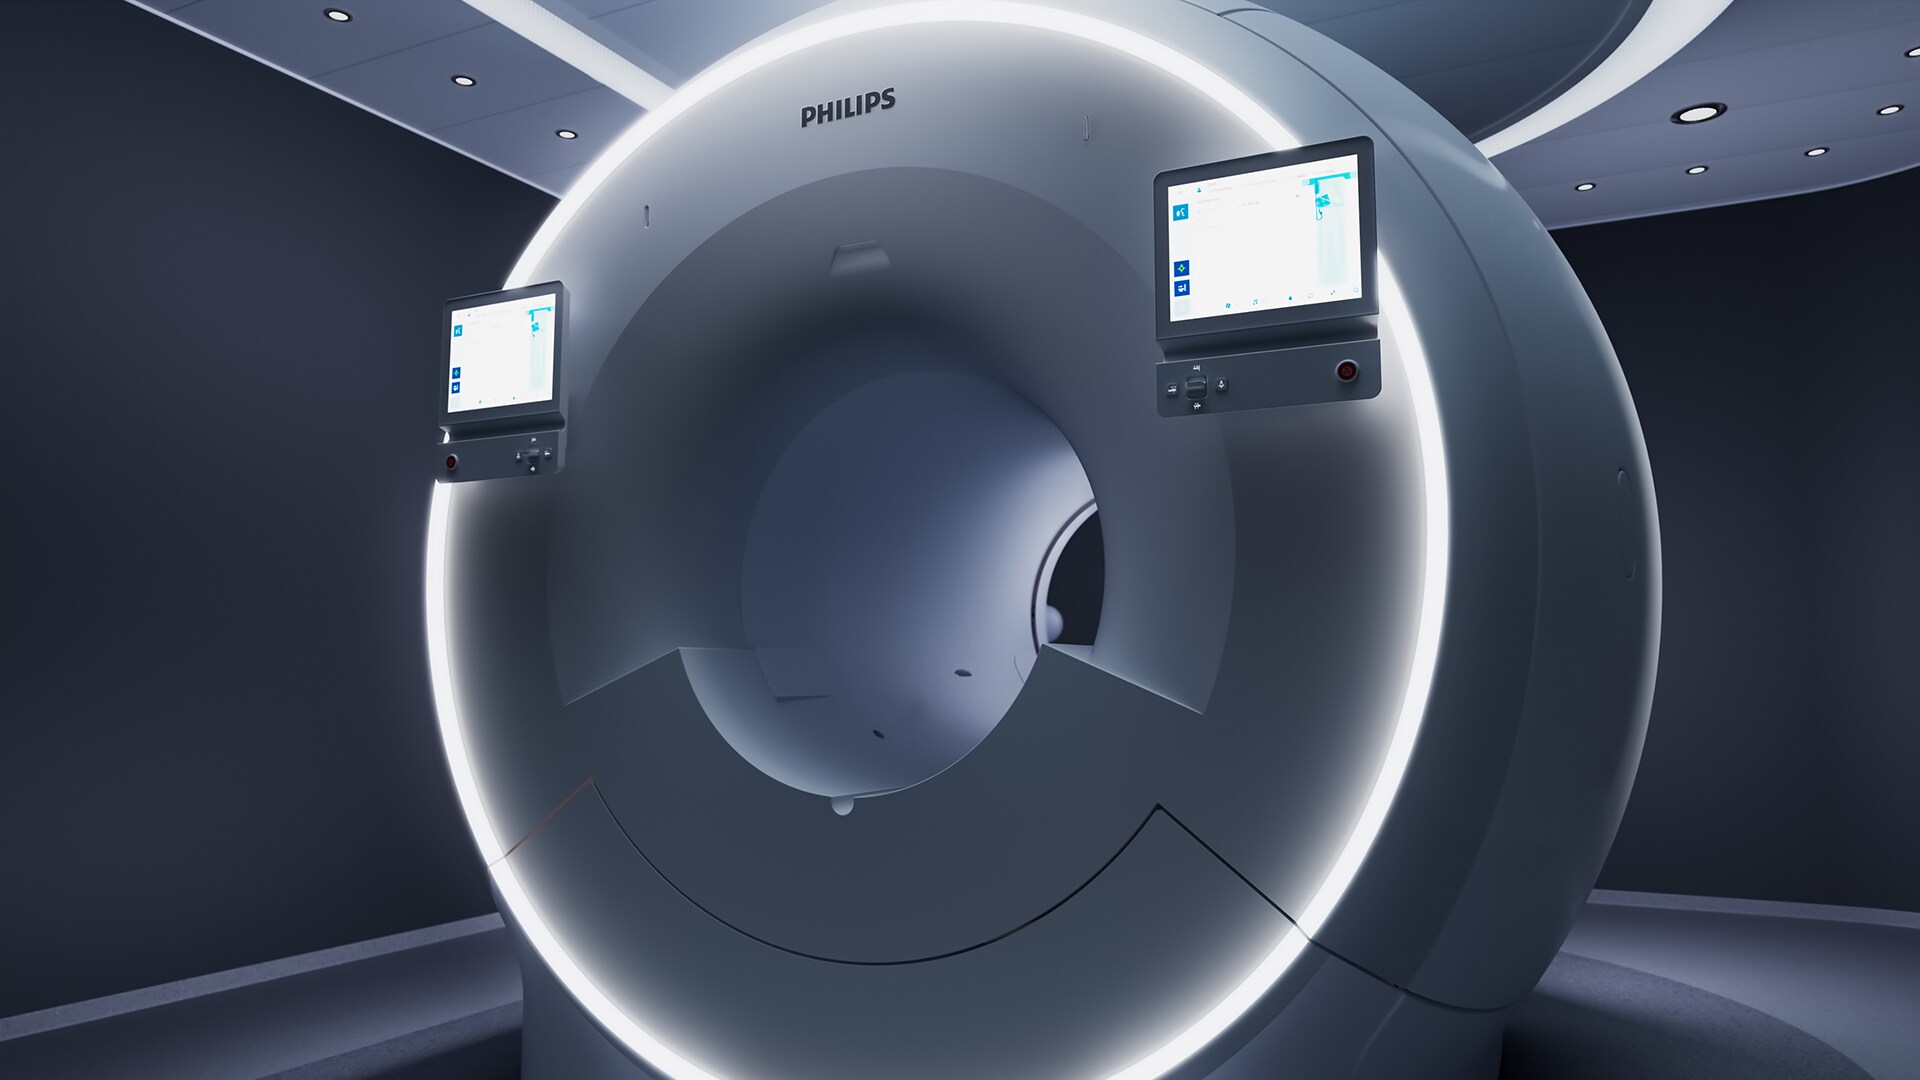 Philips breakthrough MR 7700 system adds Xenon capabilities to enhance ventilation imaging at ISMRM 2023